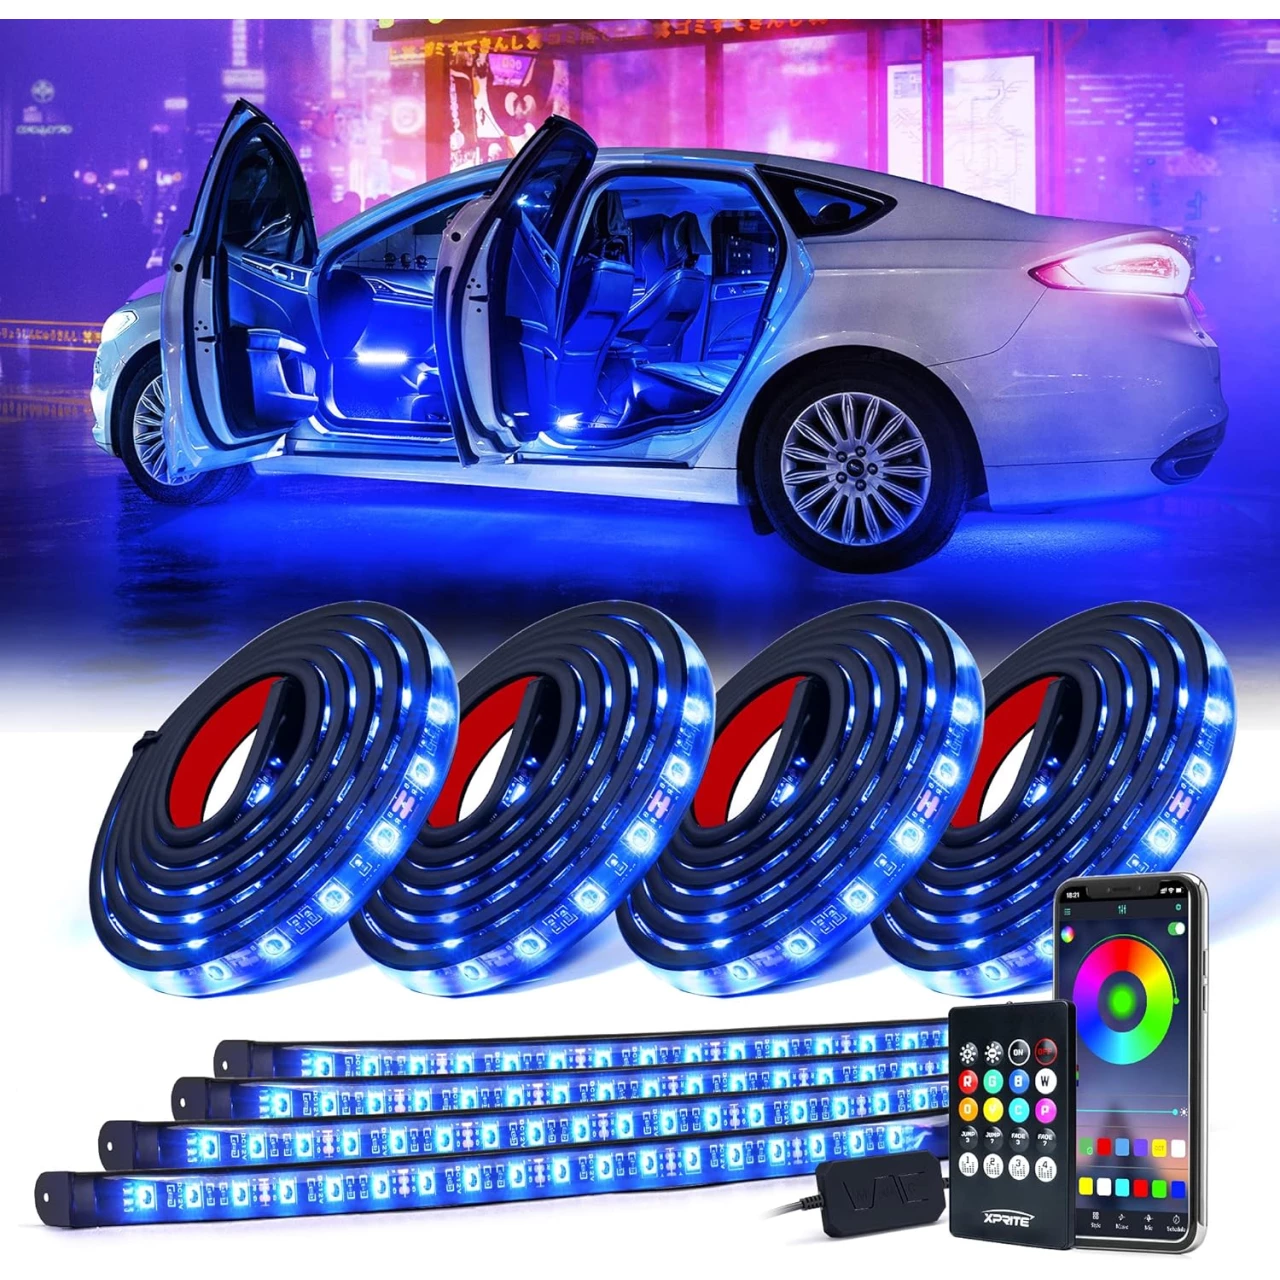 Xprite RGB LED Car Underglow Exterior Light and Interior Bluetooth Lights Kits, 8PCS Underbody Inside Glow Footwell Neon Ambient Lighting Strip